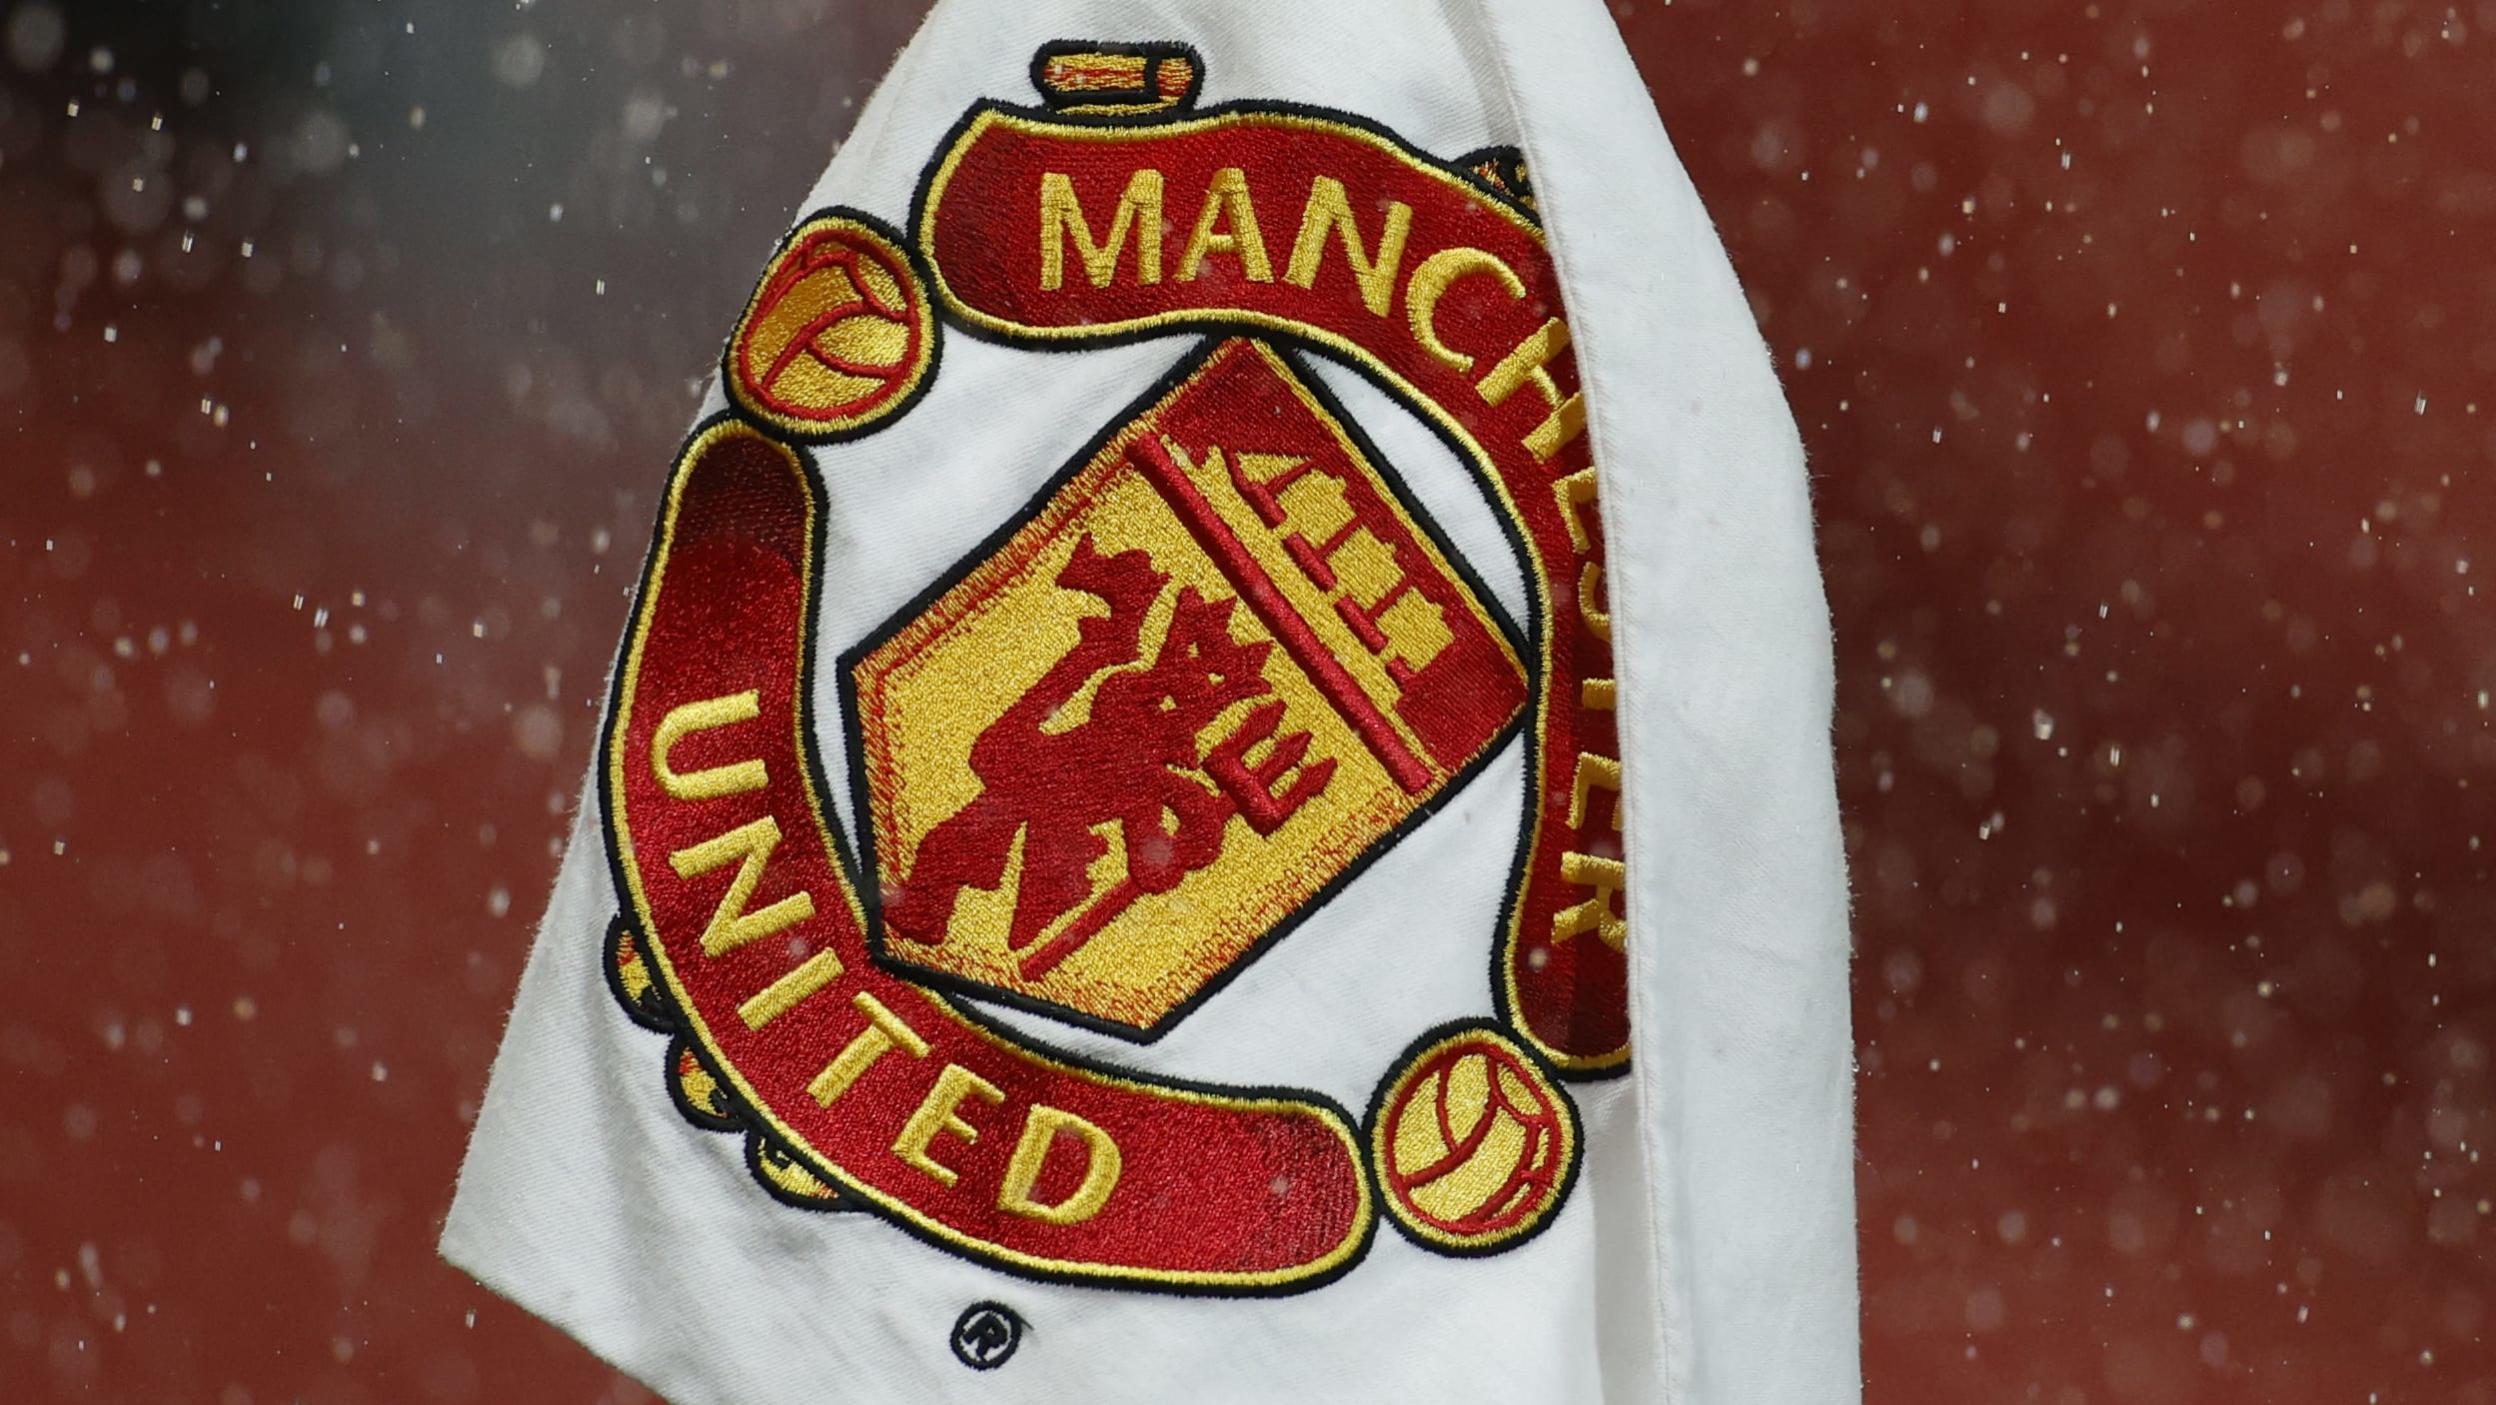 Manchester United owners reportedly seek to take organization private